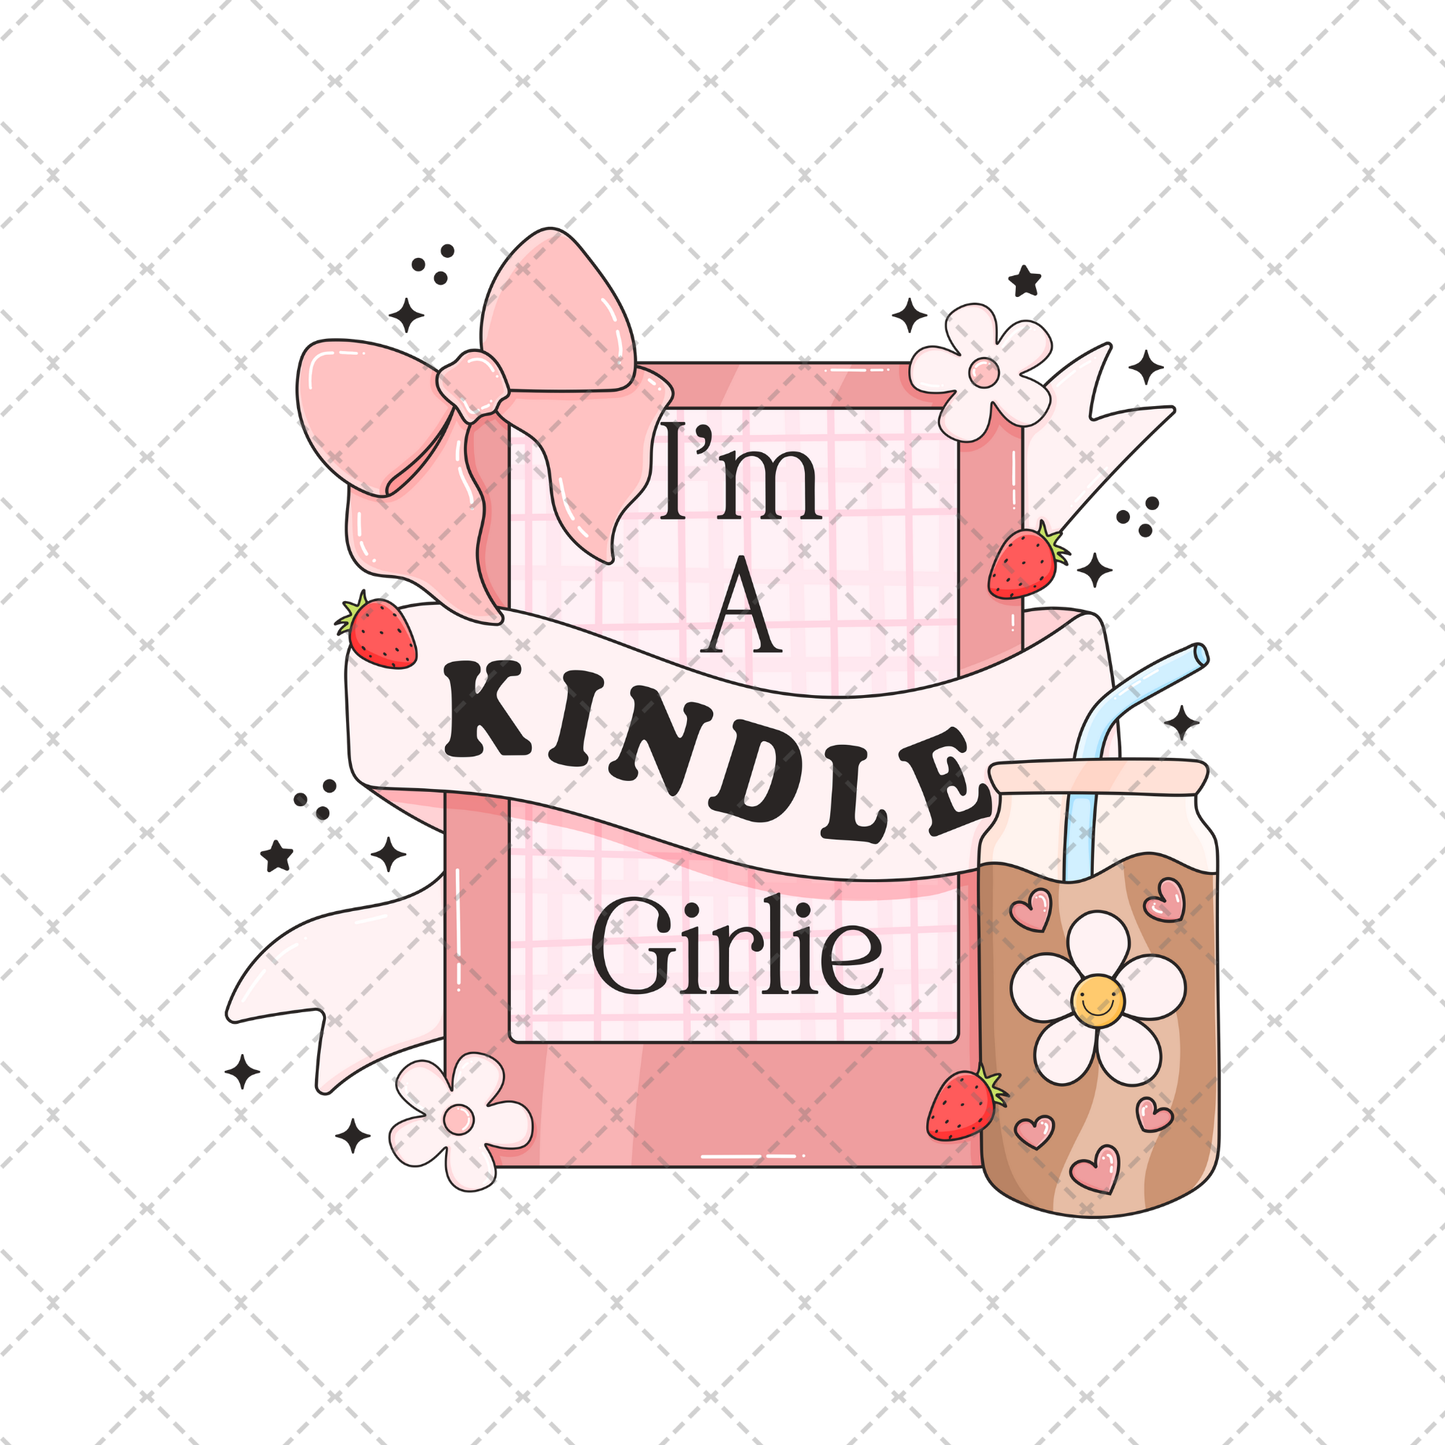 Coquette Kindle Girlie Transfer